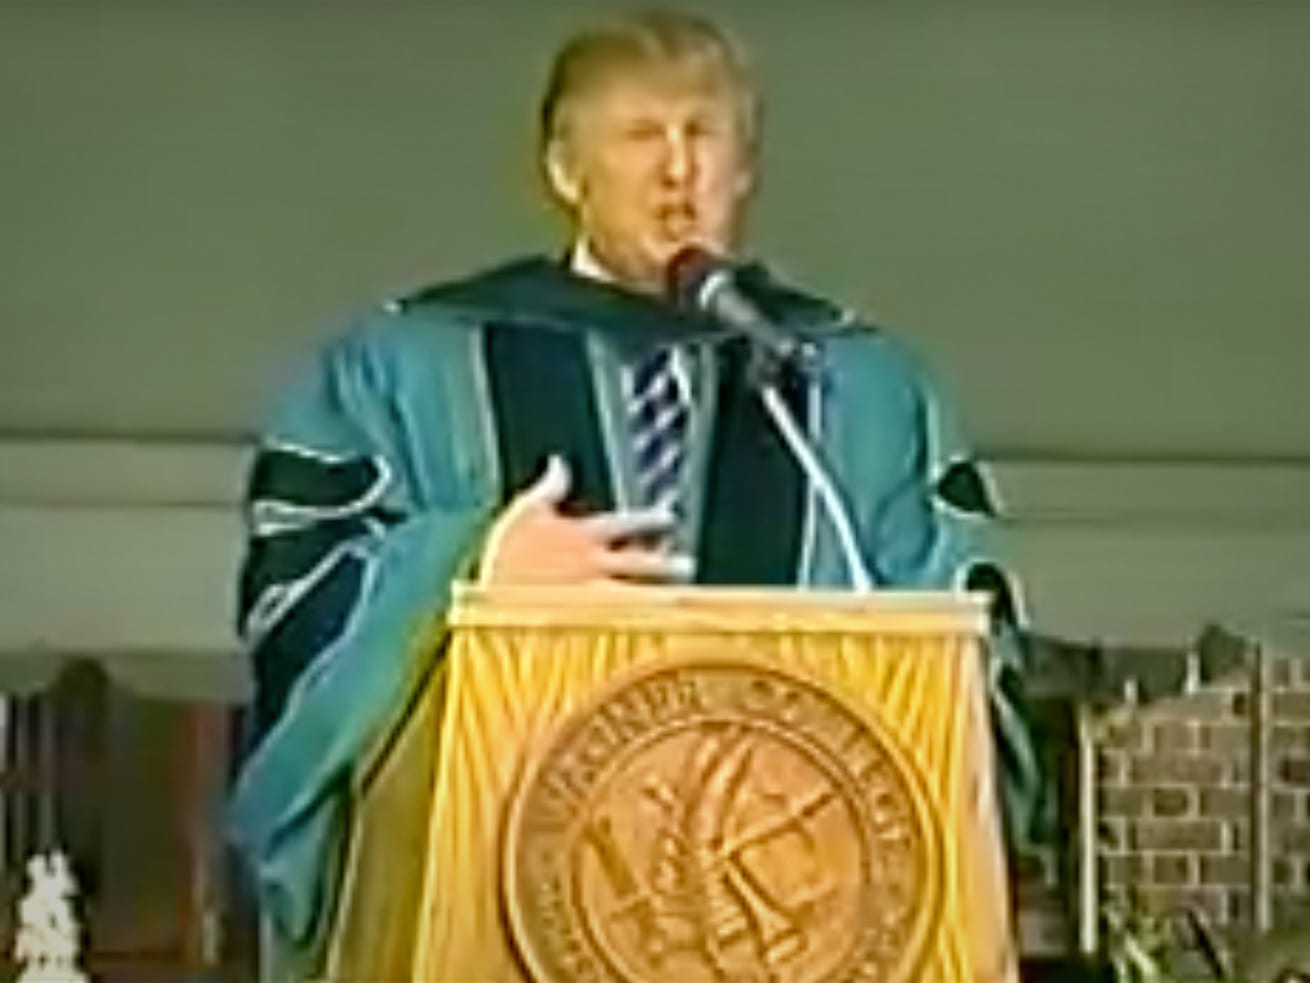 This 2004 video of Trump talking about walls is very awkward now